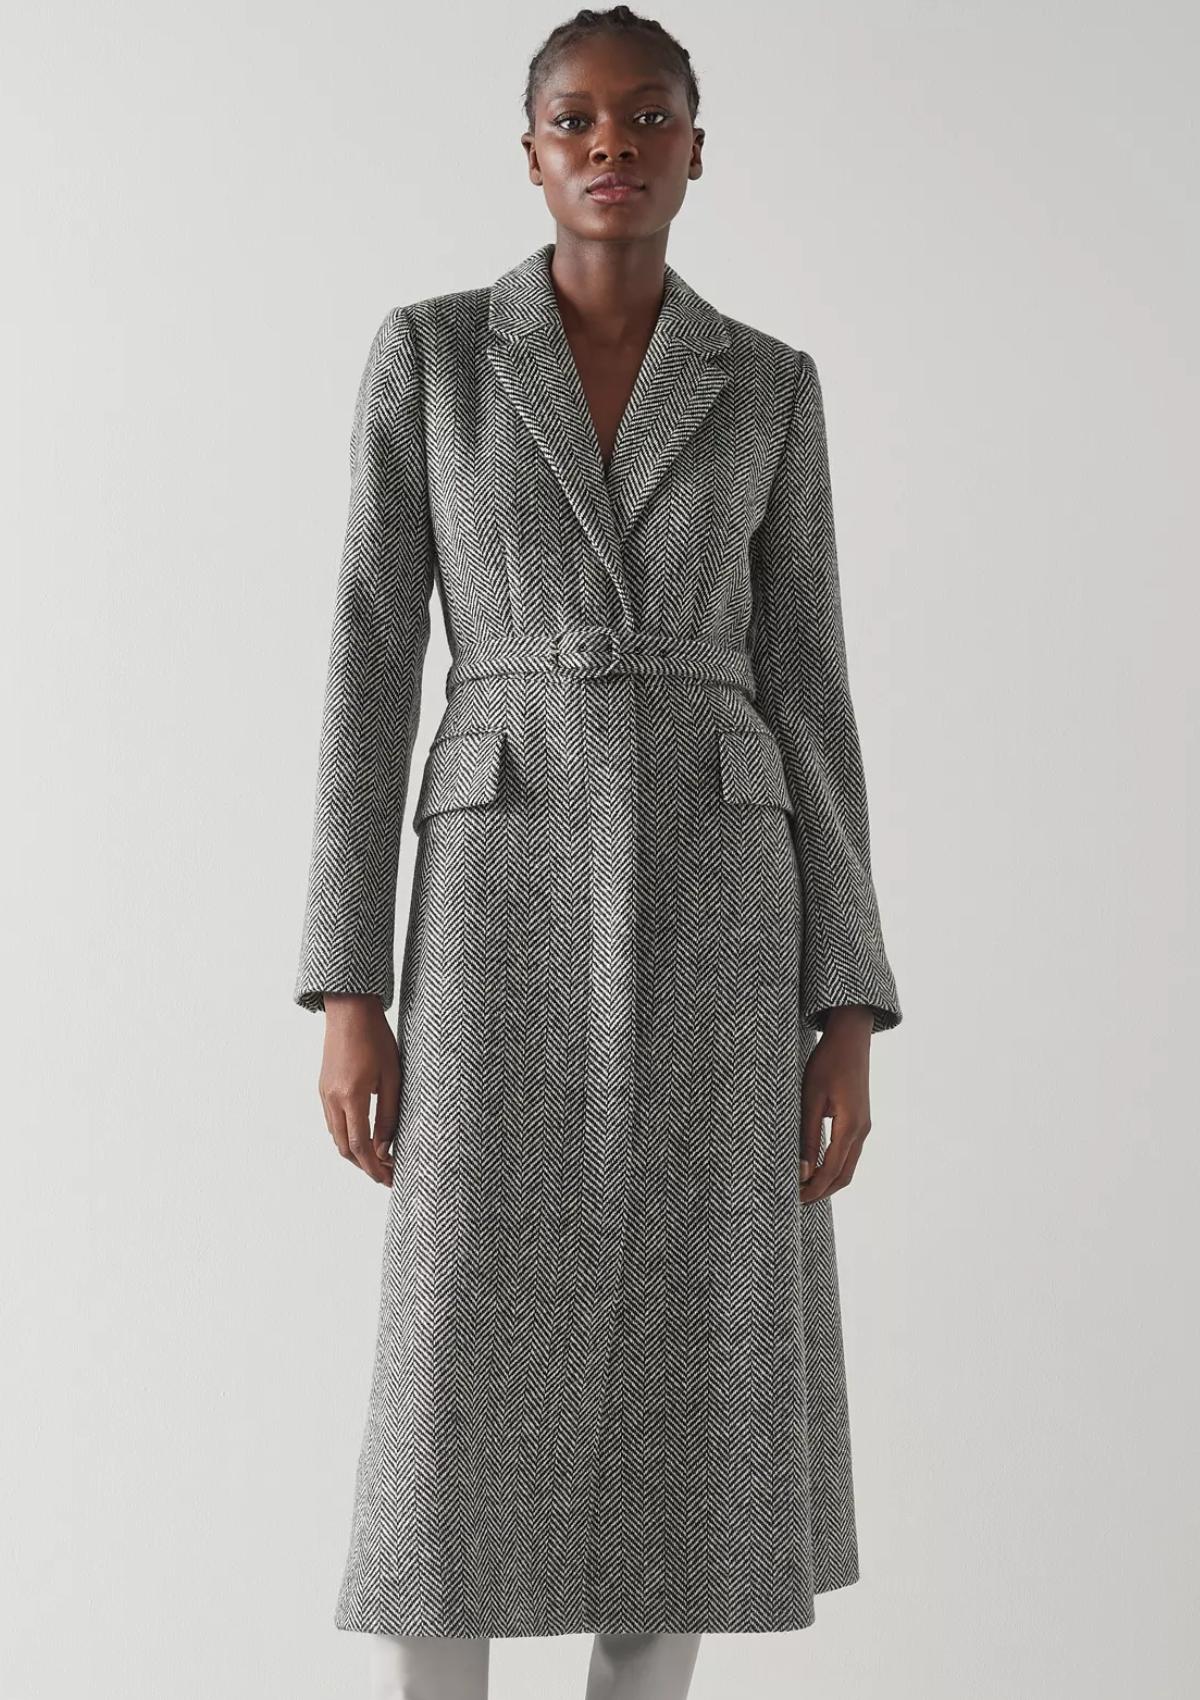 21 of the Best Coats & Coat Dresses for Weddings - hitched.co.uk ...